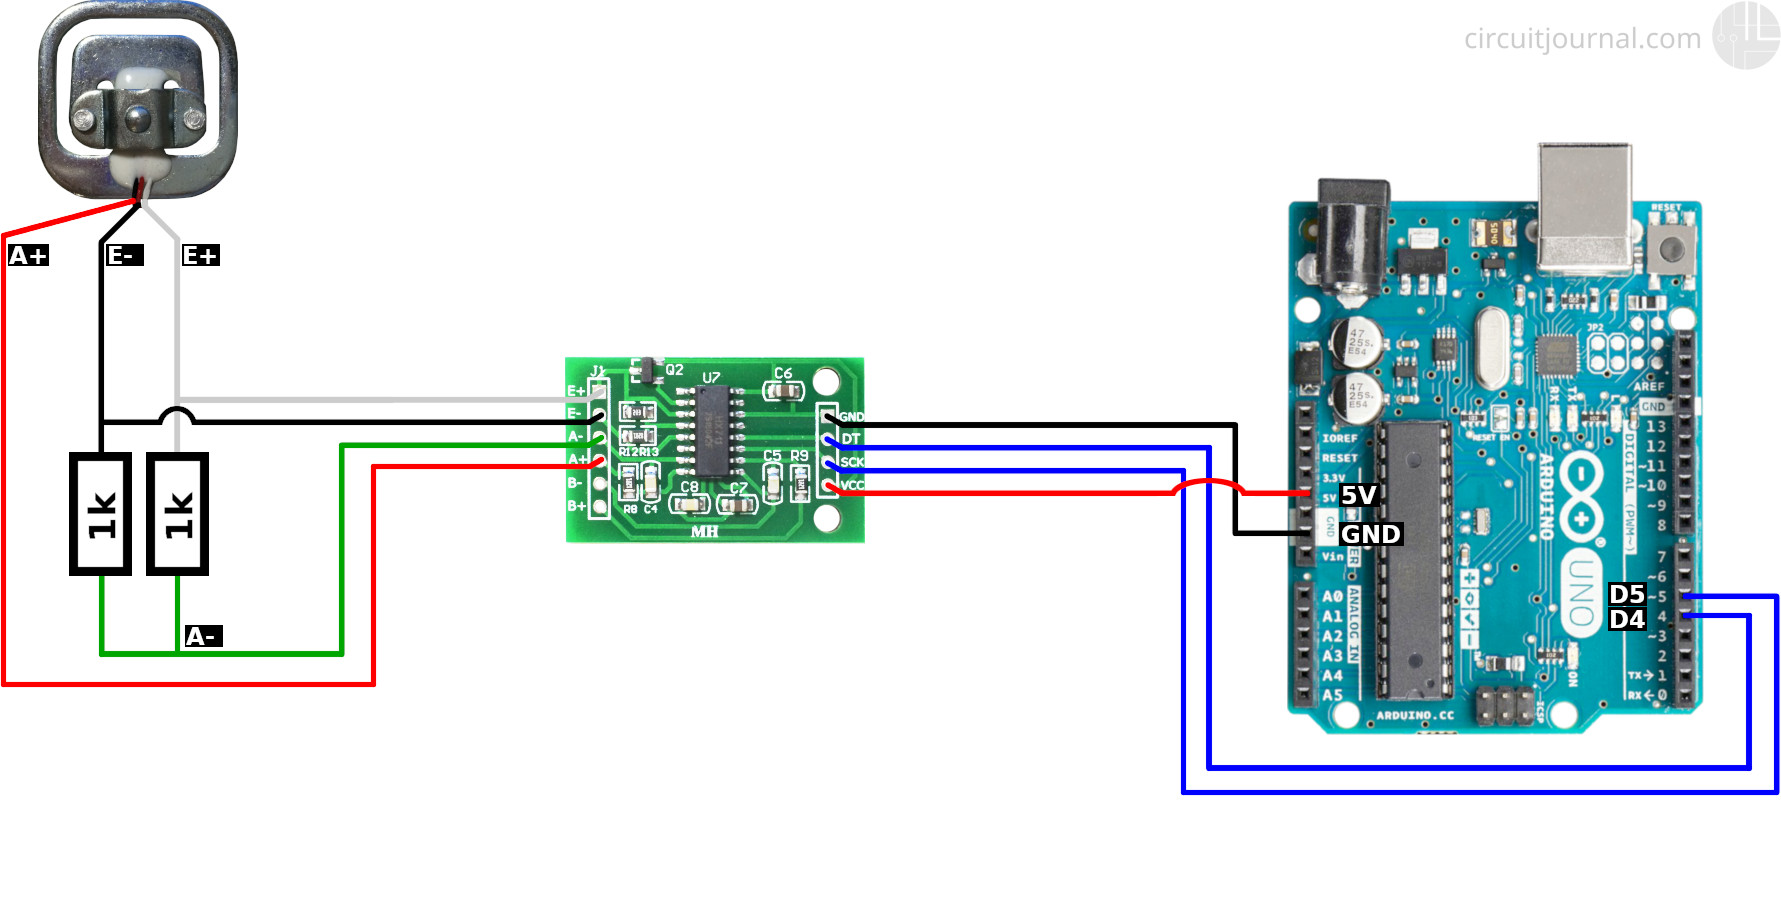 50kg Load Cells with HX711 and Arduino. 4x, 2x, 1x Diagrams. - Circuit  Journal